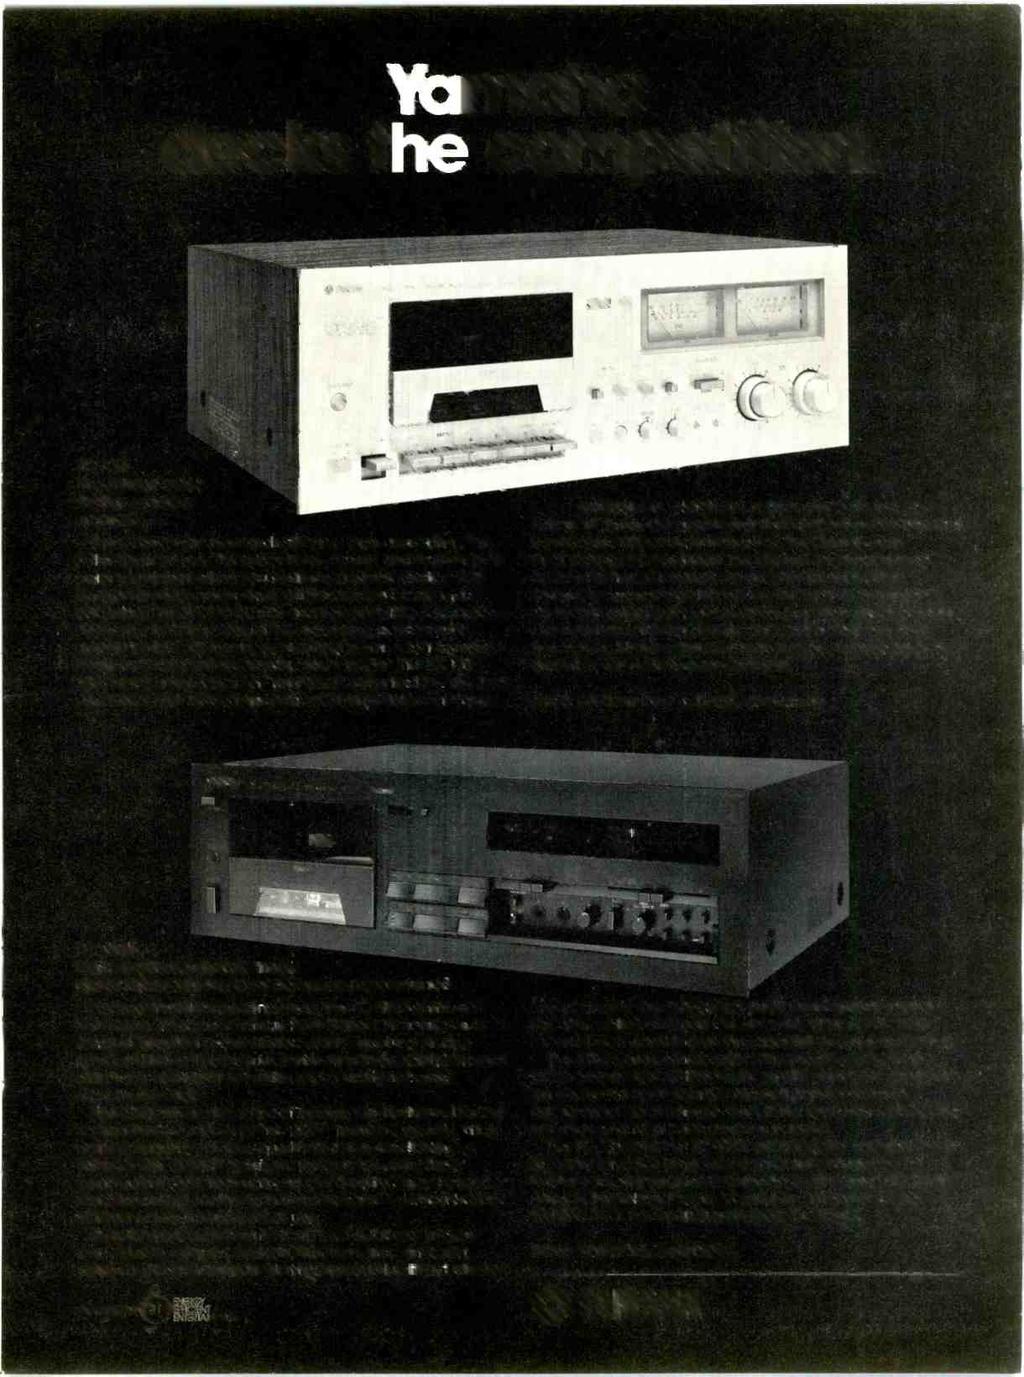 Yamaha decks the competition. TC-720. The 3 -head deck for the creative recordist. l- you like to get involved w m your tape recording this is tie deck for you.